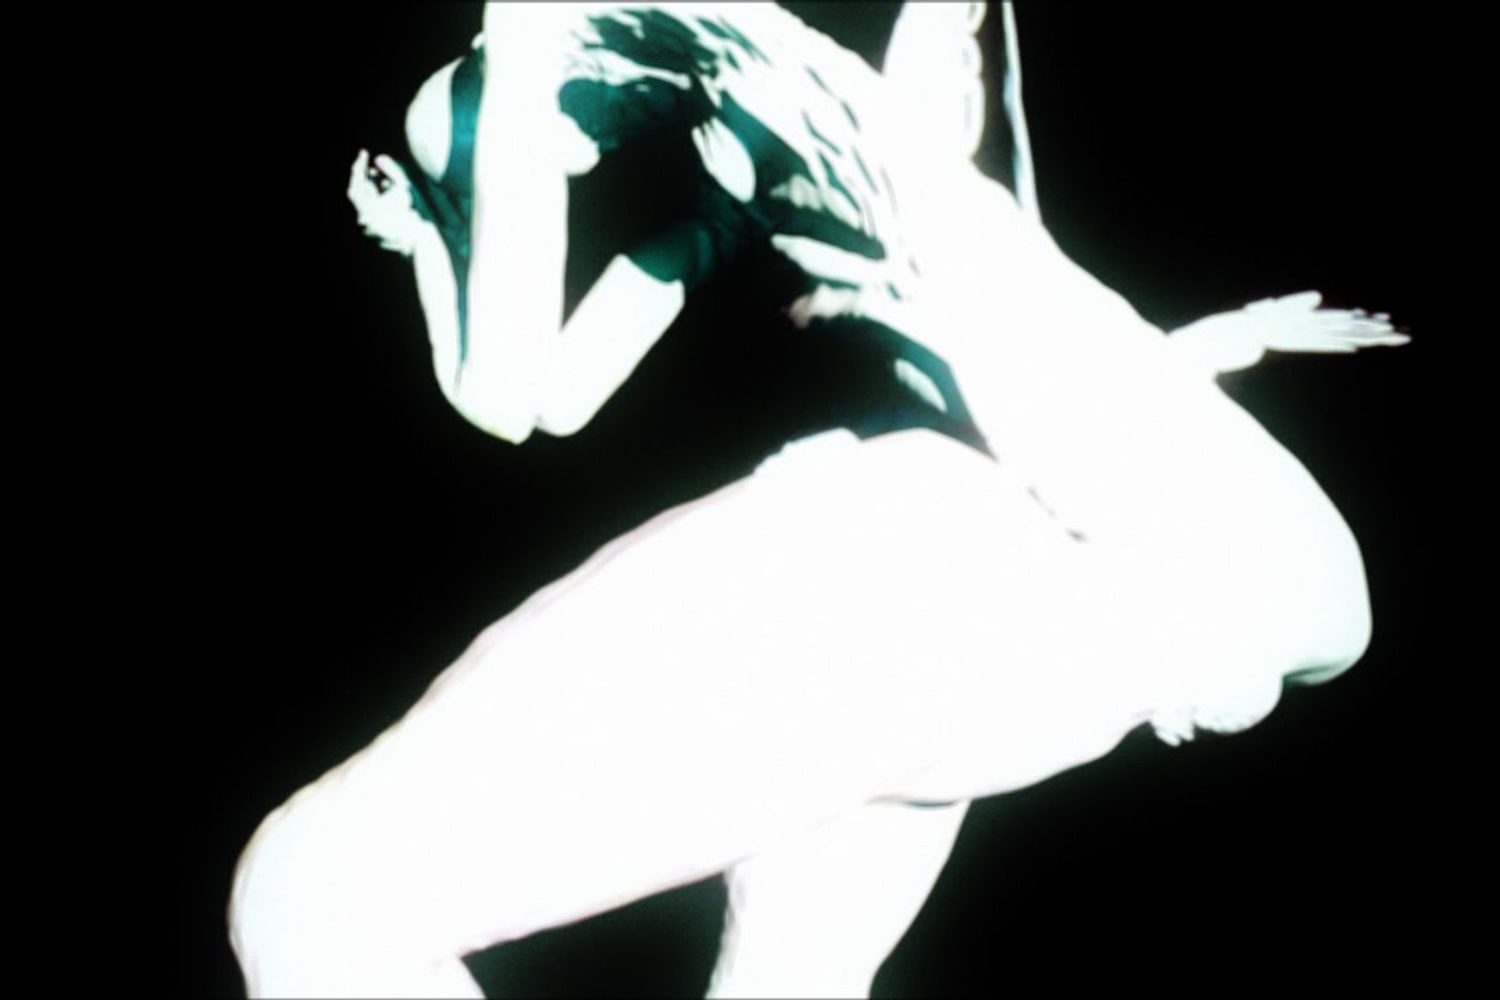 Watch a new NSFW, strobe heavy video from Arca